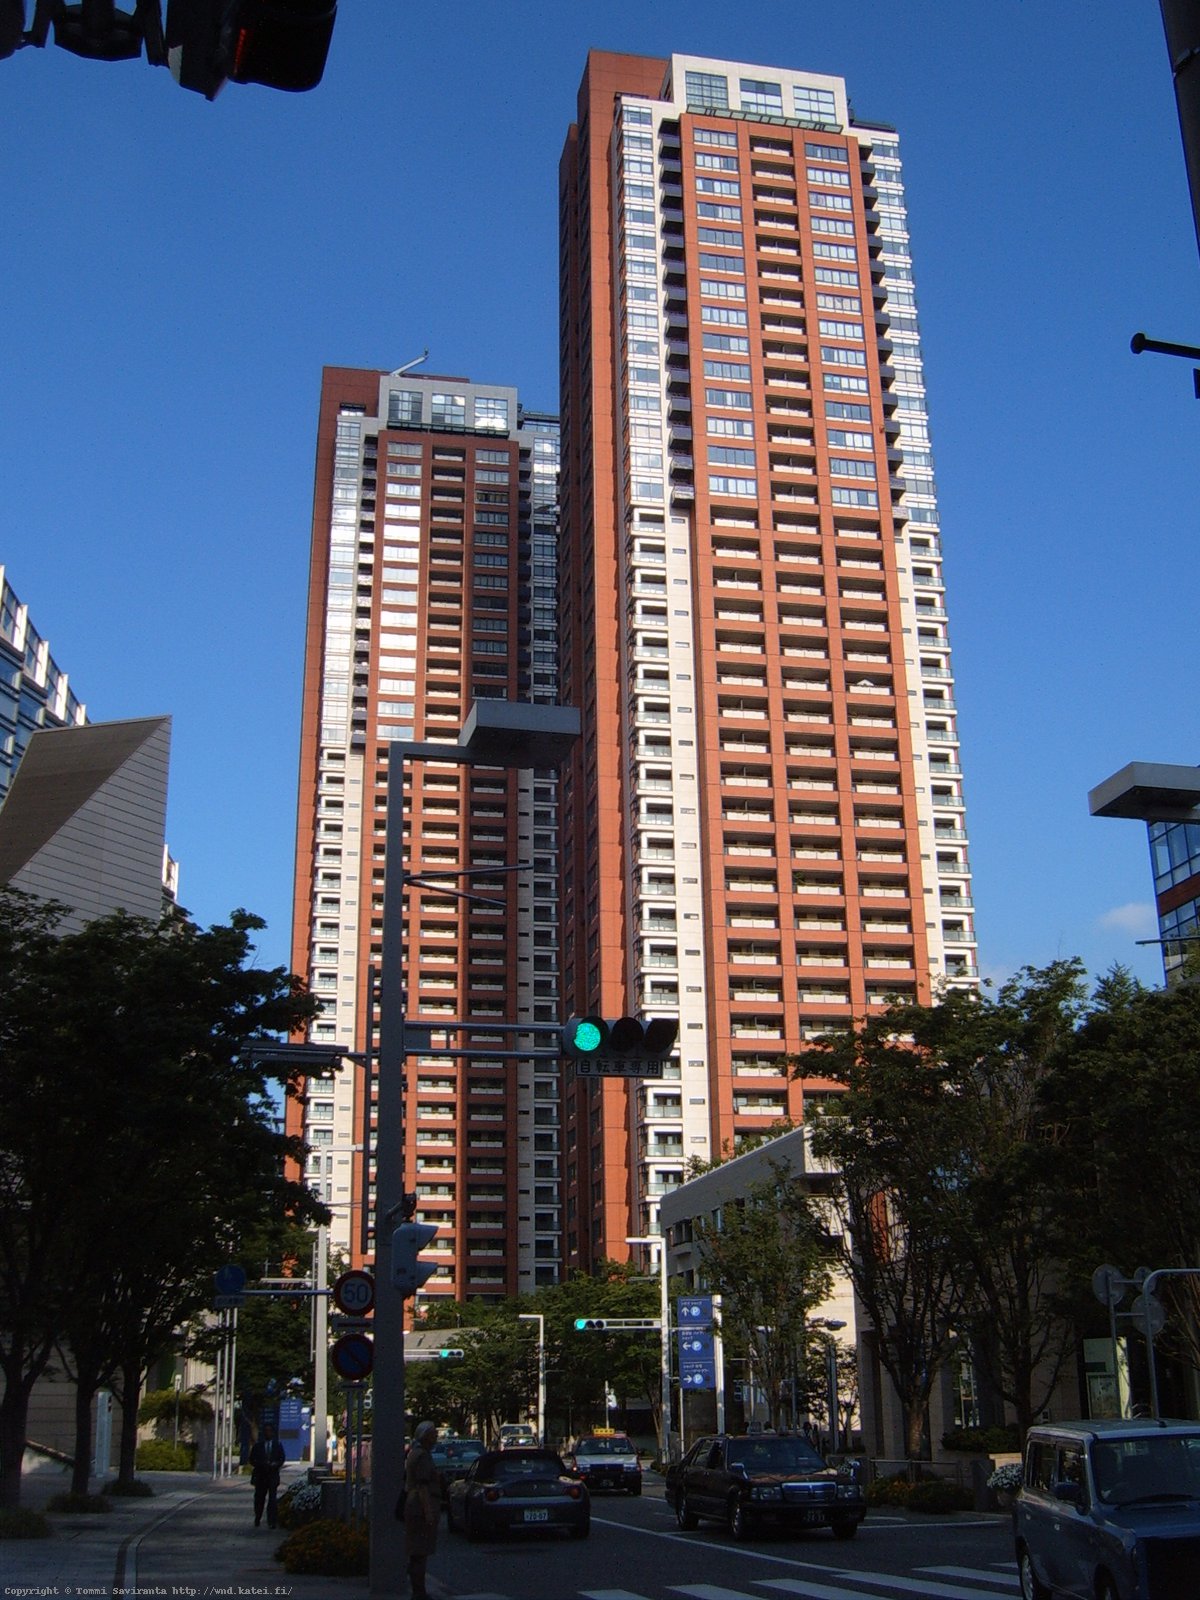 Day #2: Modest apartment buildings in Roppongi hills